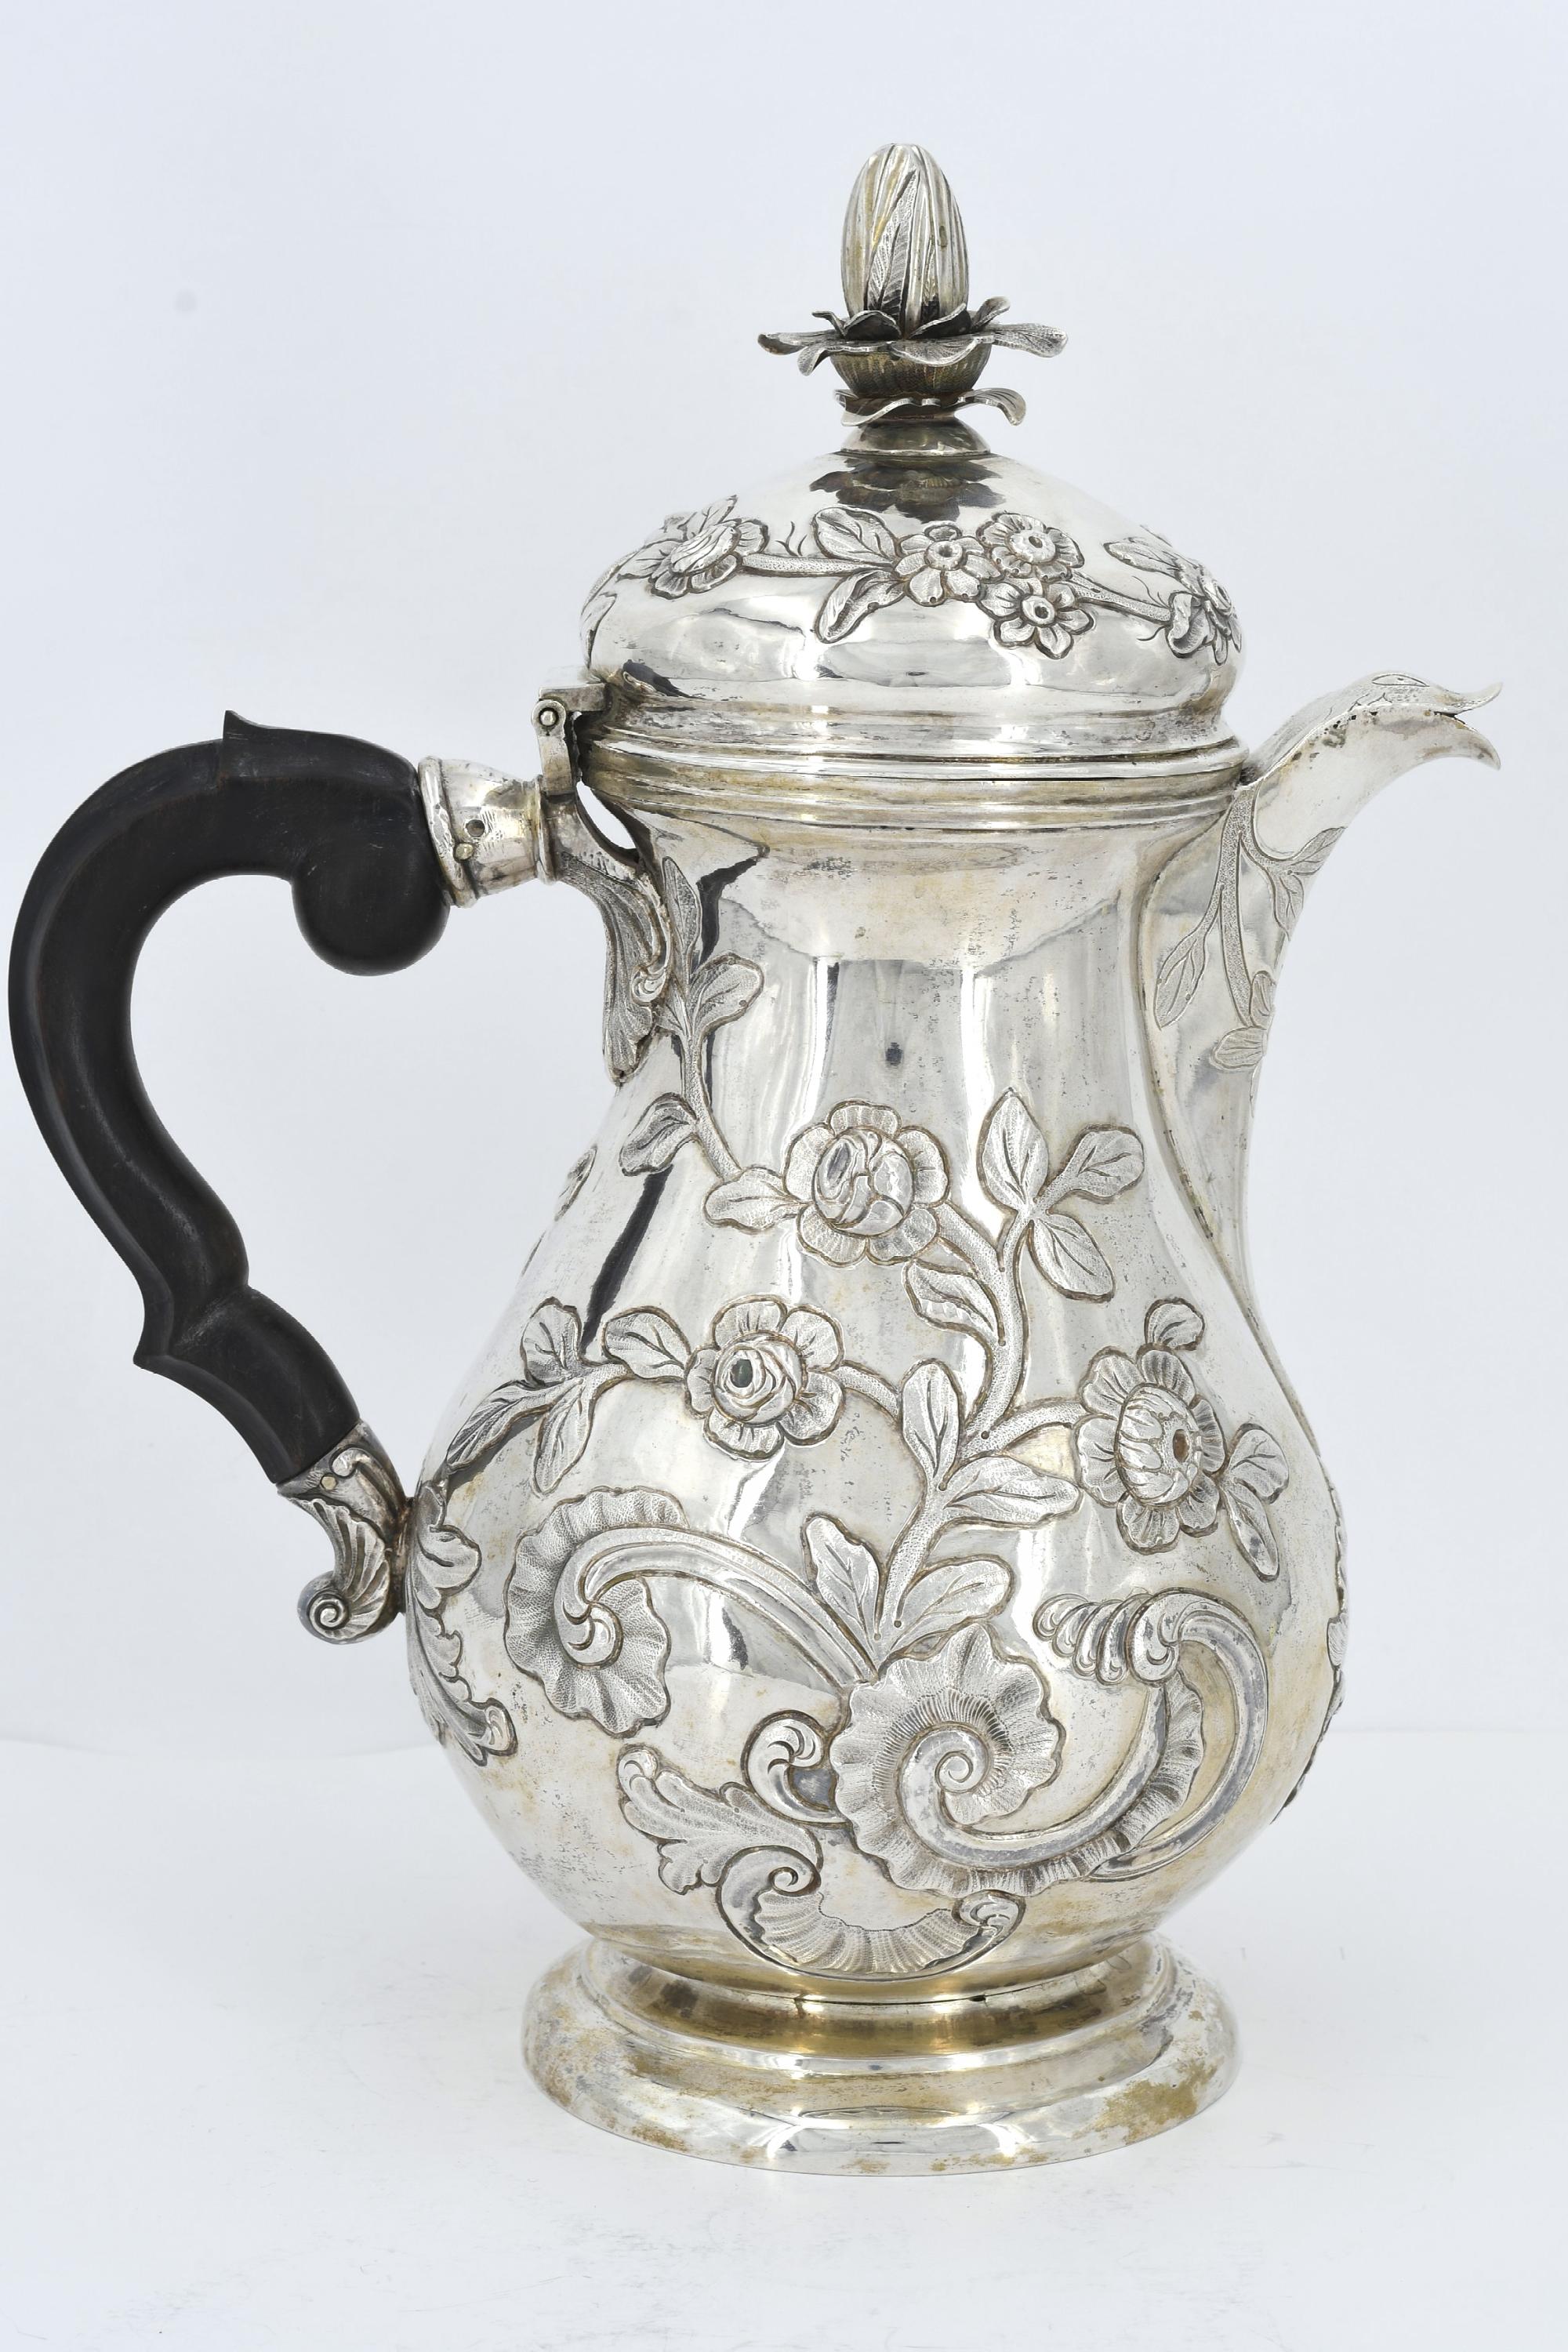 LARGE SILVER PITCHER PRESUMABLY CHRISTENING WATER PITCHER - Image 4 of 7